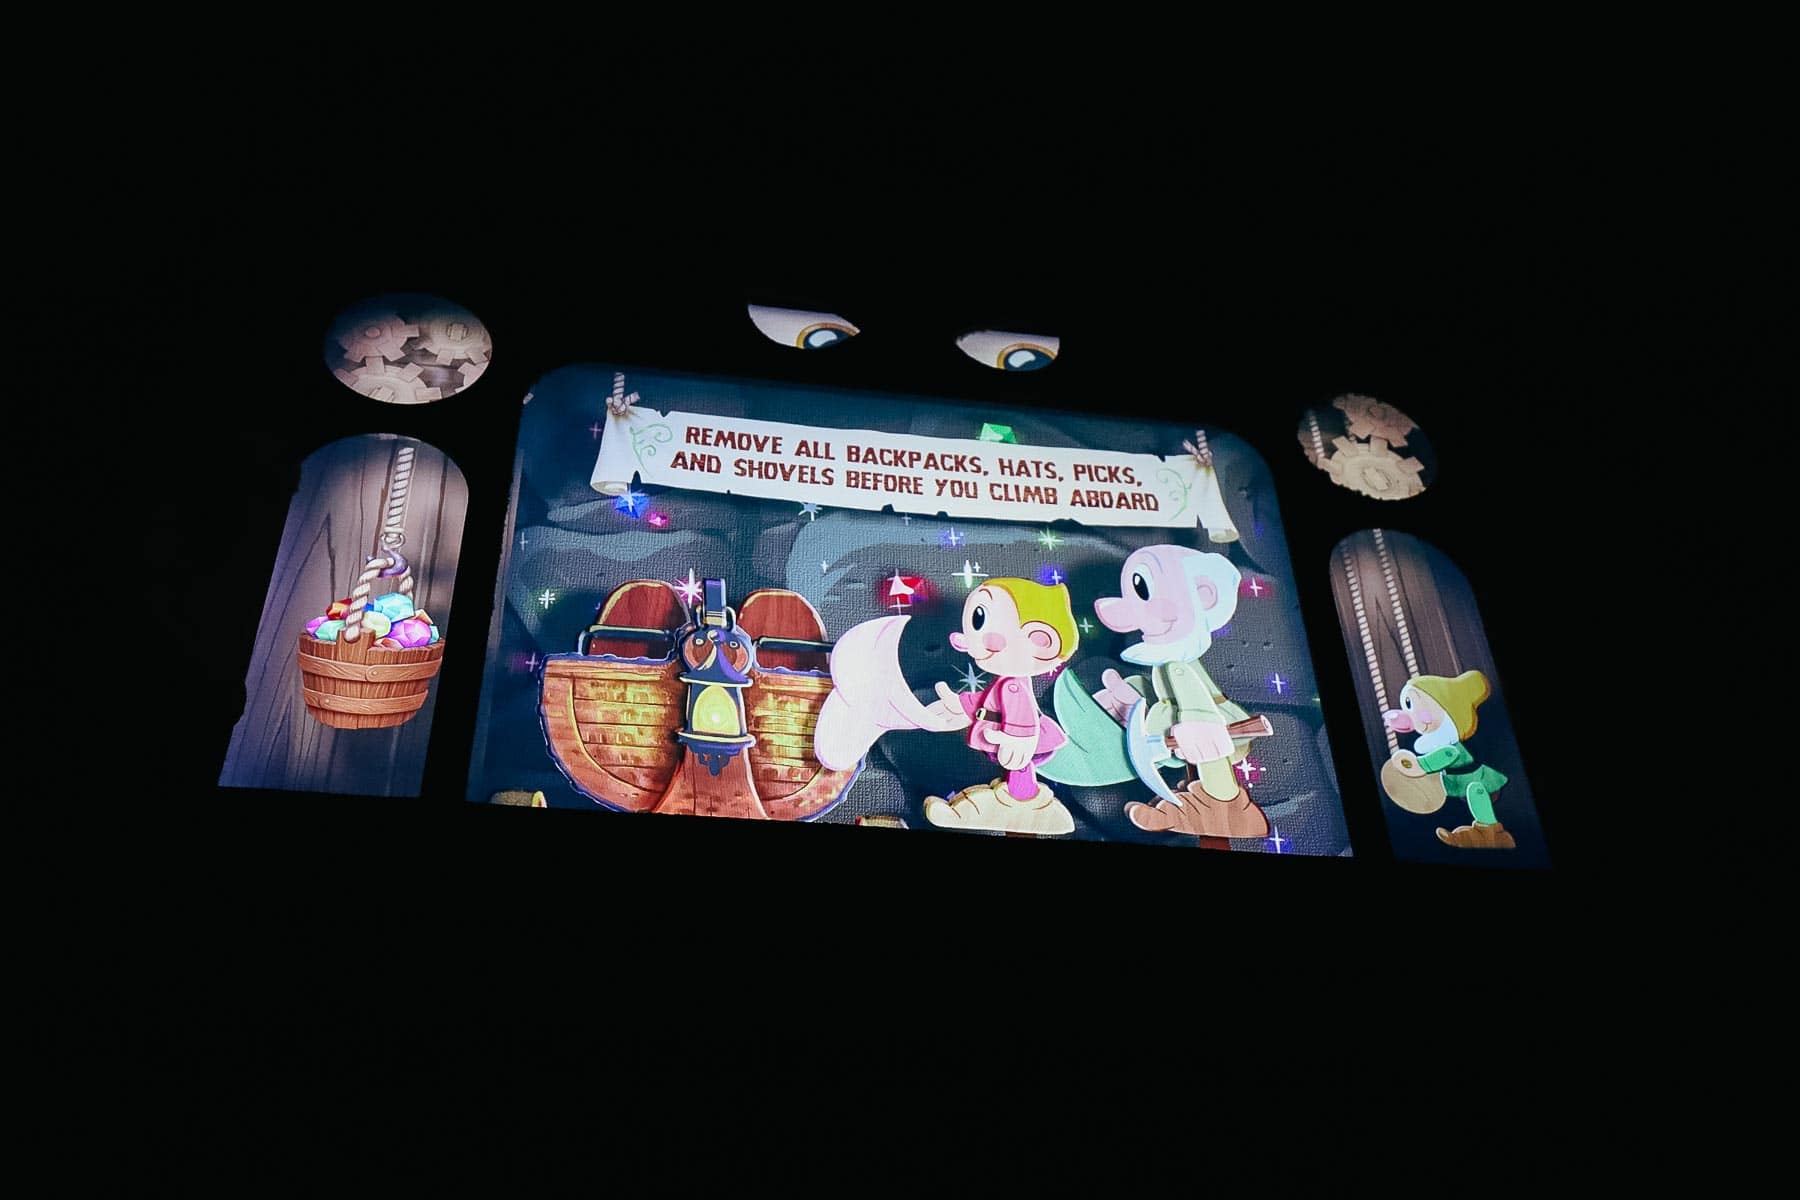 A screen that shares the ride's boarding process. It reads, "Remove all backpacks, hats, picks, and shovels before you climb aboard." 